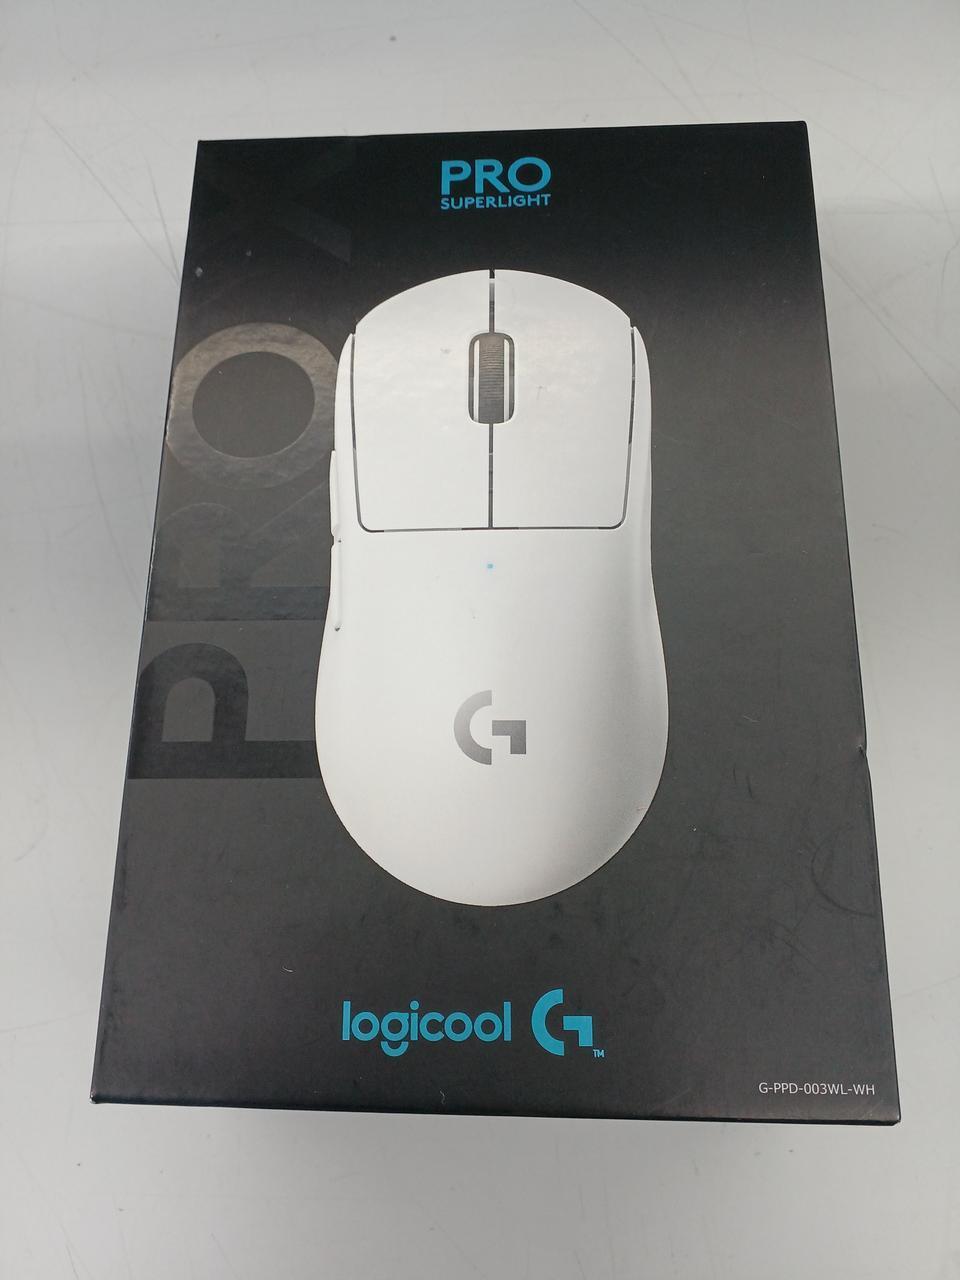 Logicool G PRO X Superlight Wireless Gaming Mouse White Good Condition Used